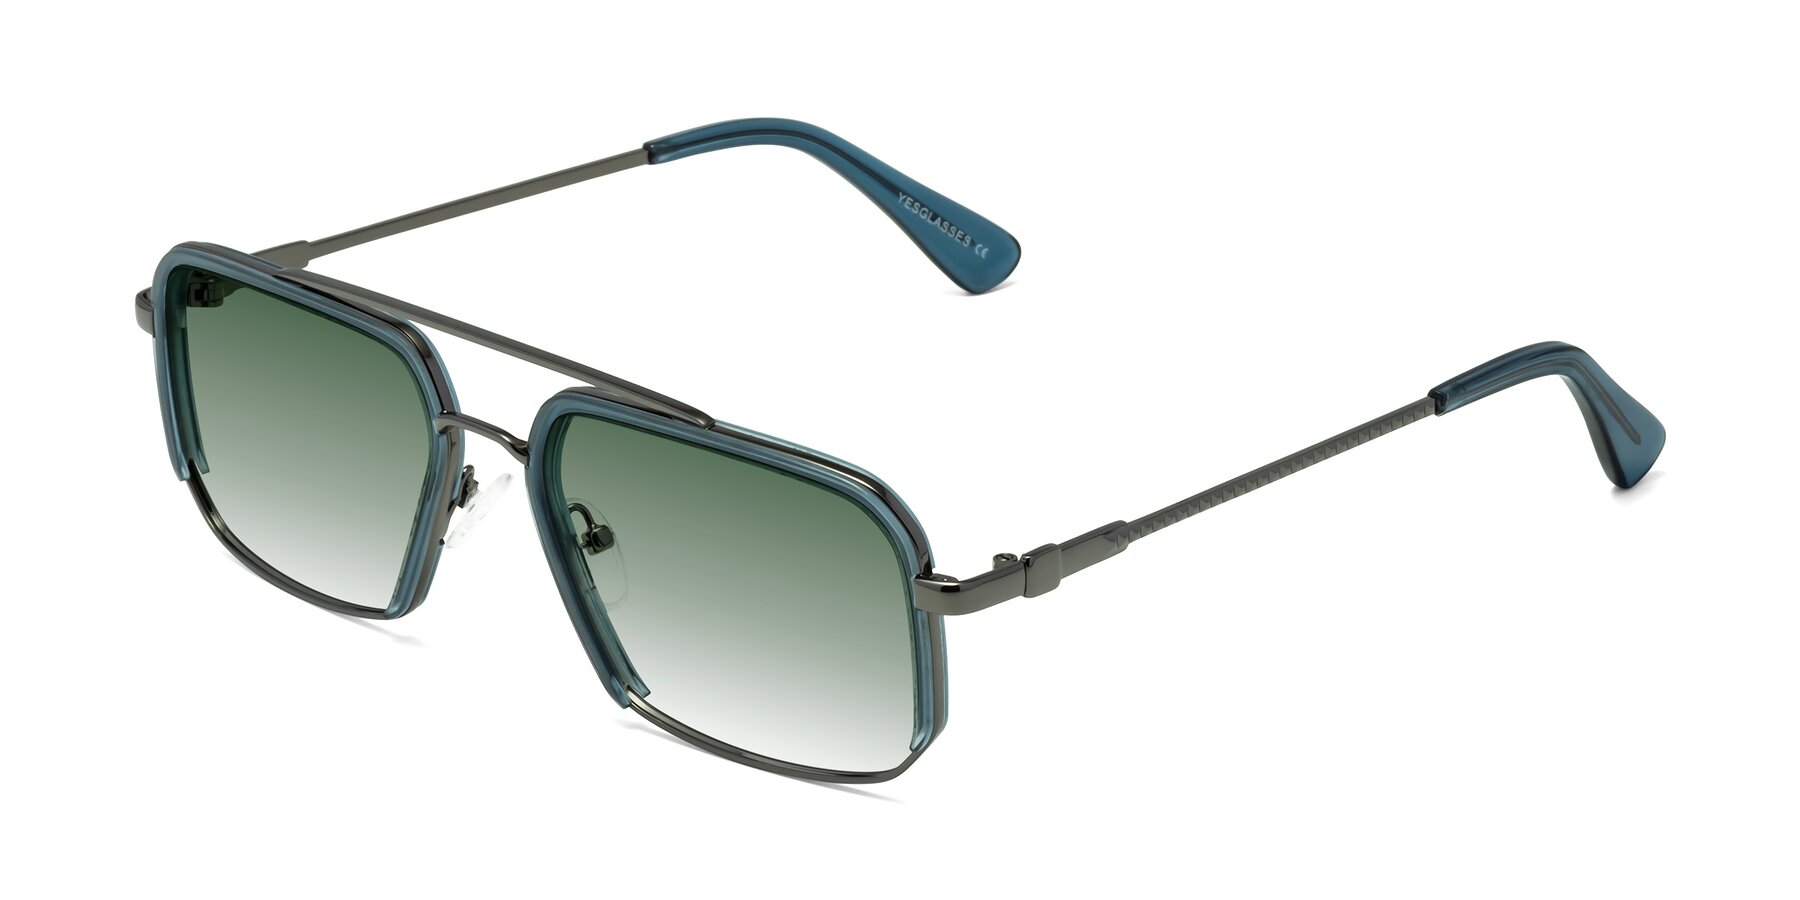 Angle of Dechter in Teal-Gunmetal with Green Gradient Lenses